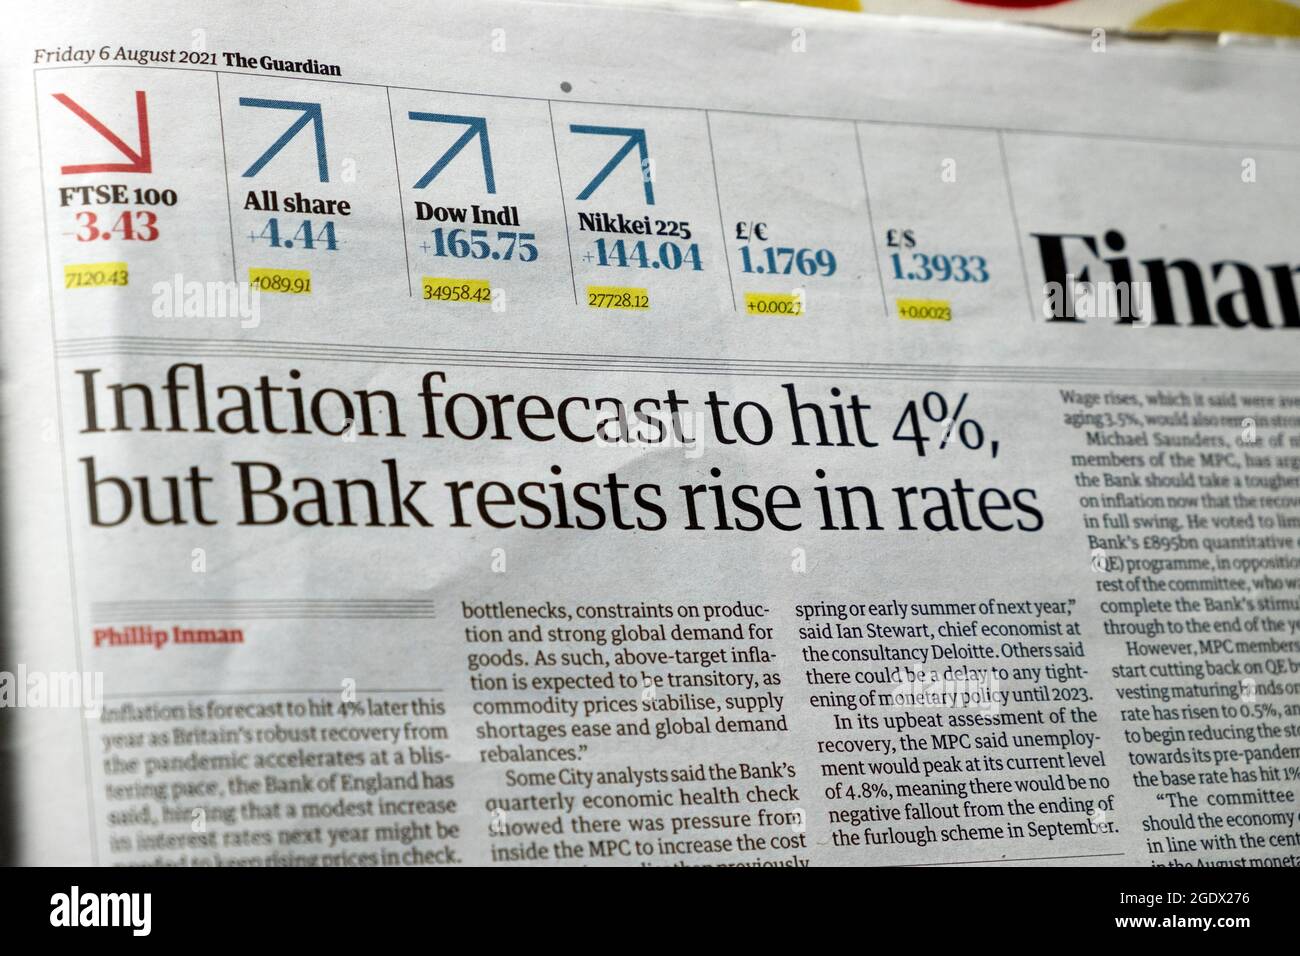 "Inflation forecast to hit 4%, but Bank resists rise in rates" Guardian Financial newspaper headline on Bamk of England article 5 August 2021 UK Stock Photo